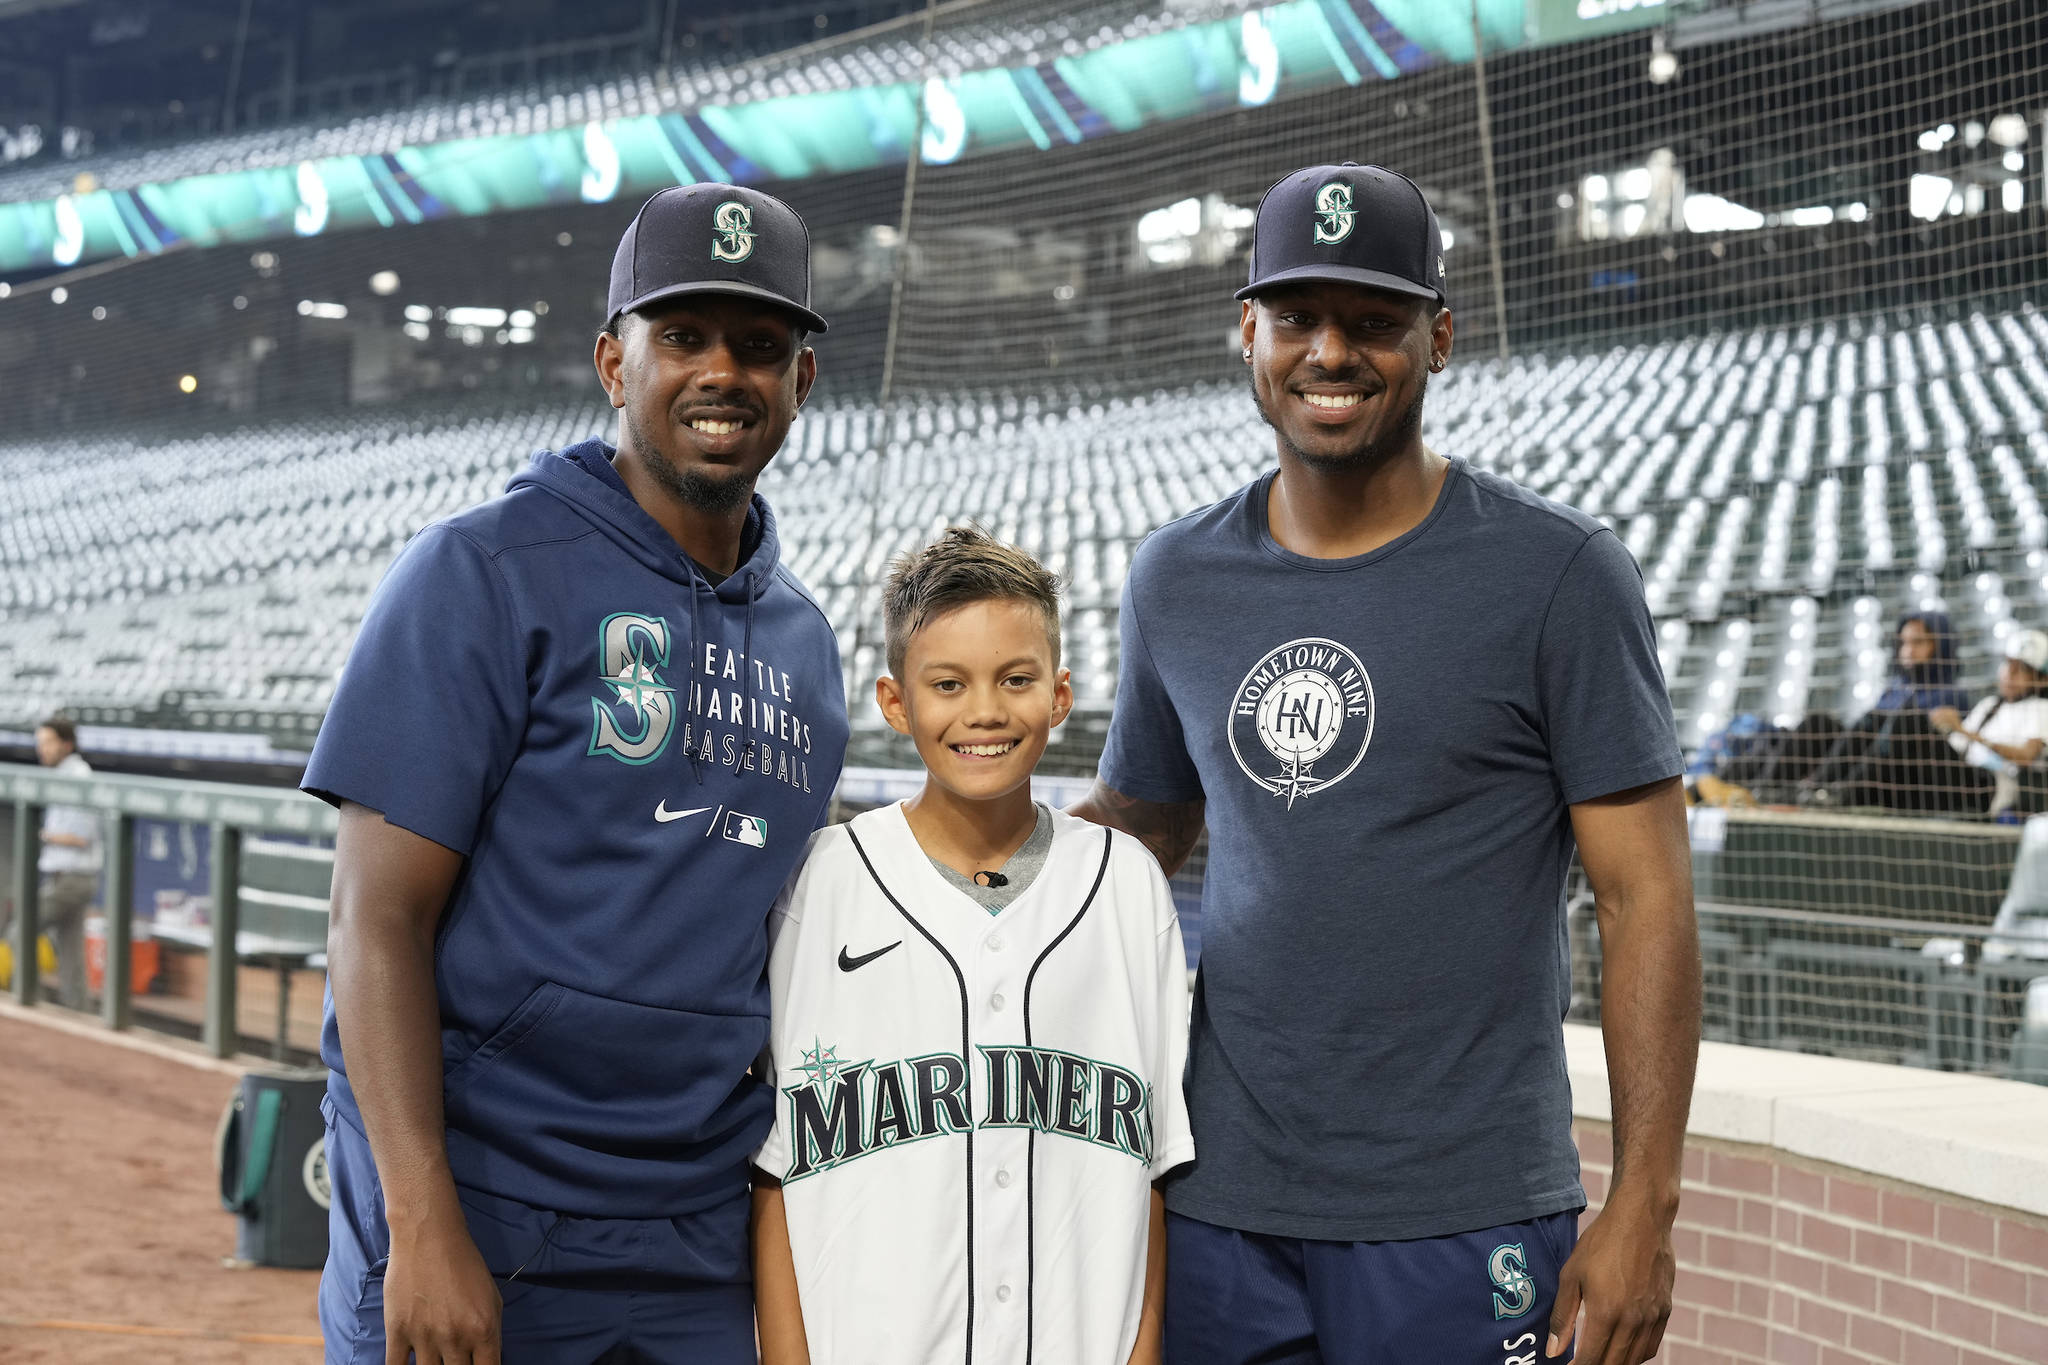 Hometown Nine fellow Imani Brown (center) poses for a photo with Mariners pitcher Justin Dunn (Left) and Mariners outfielder Kyle Lewis during an event for the Hometown Nine class of 2026 at T-Mobile Park. Photo by Ben VanHouten/ Seattle Mariners.